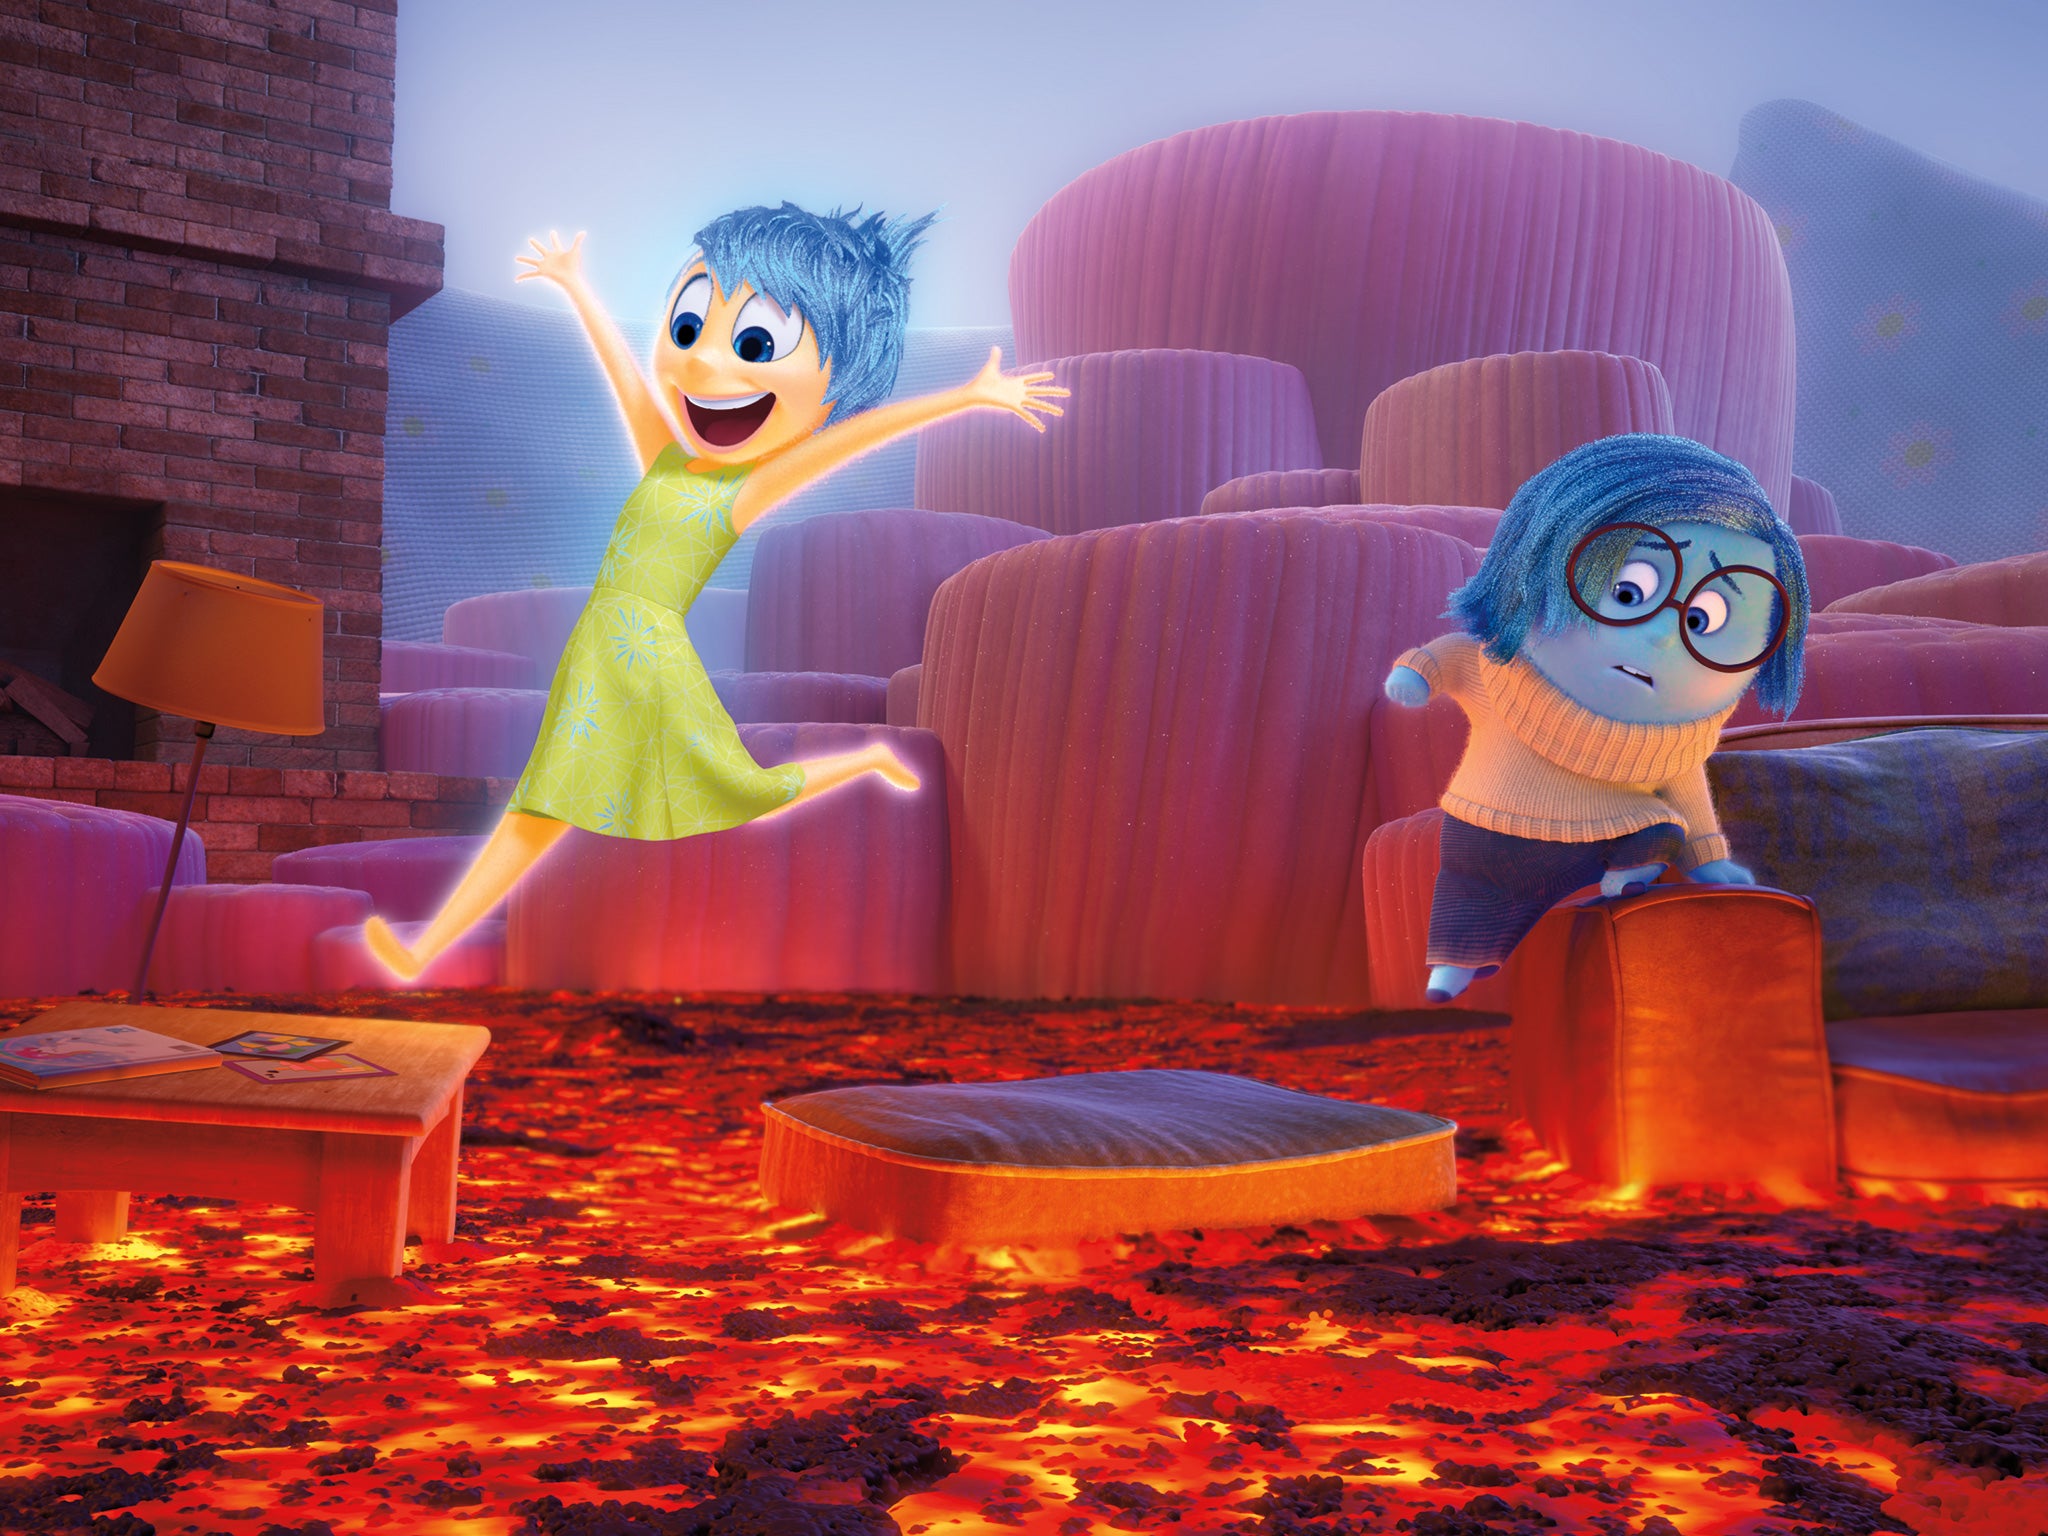 All in the mind: Joy and Sadness, two of the emotions made human in 'Inside Out'